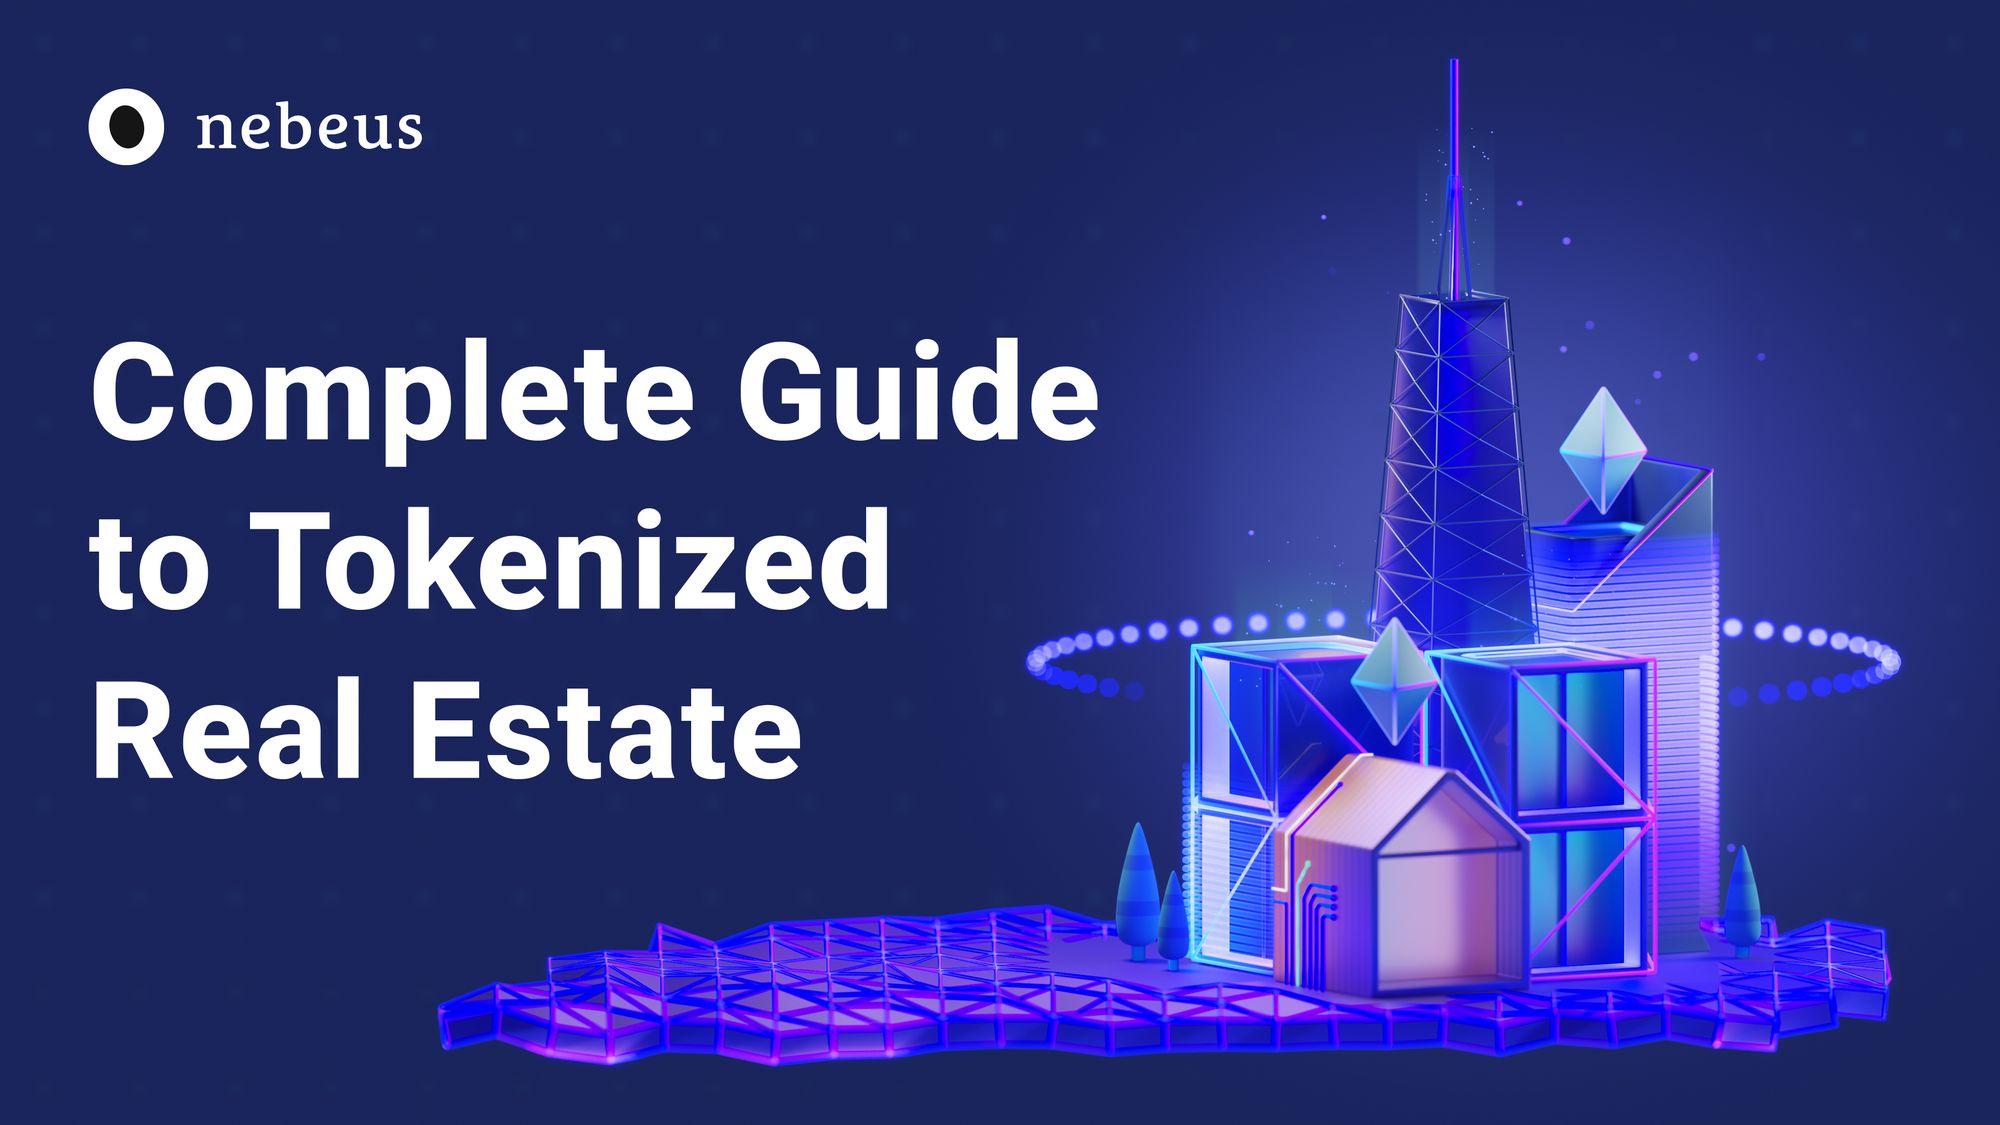 Complete Guide to Tokenized Real Estate